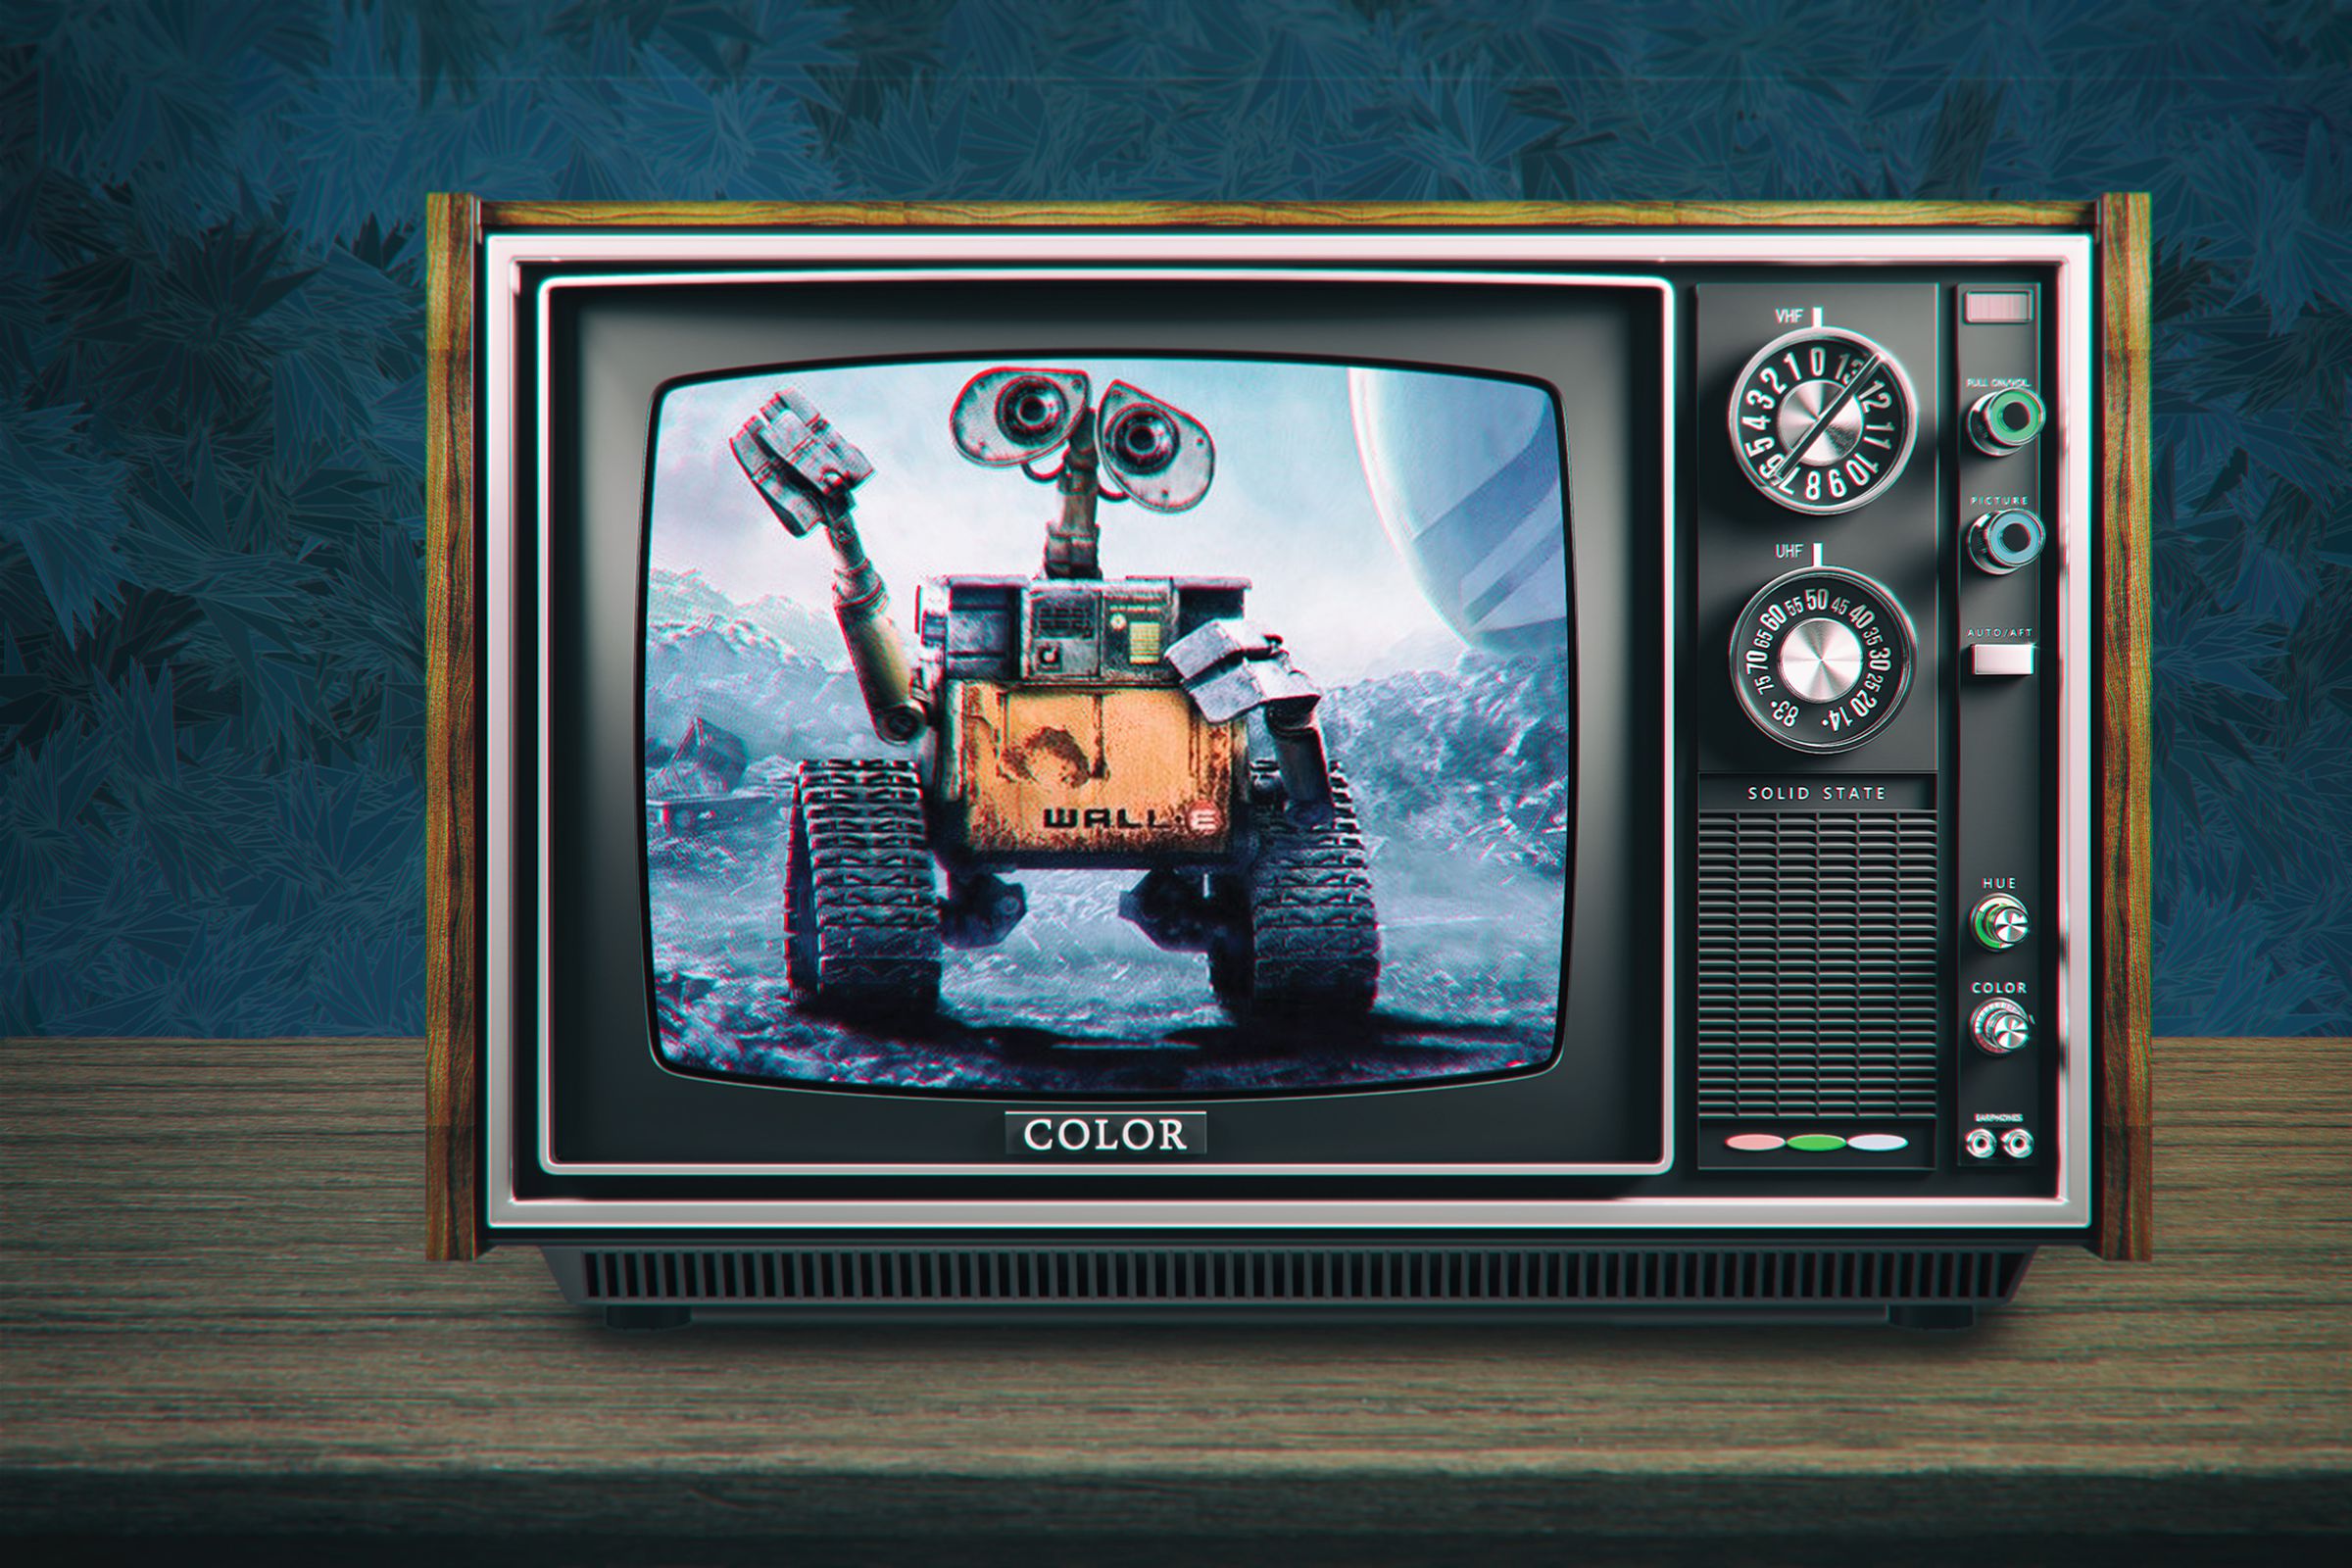 Image of WALL-E, a square robot, on an old-fashioned TV set.